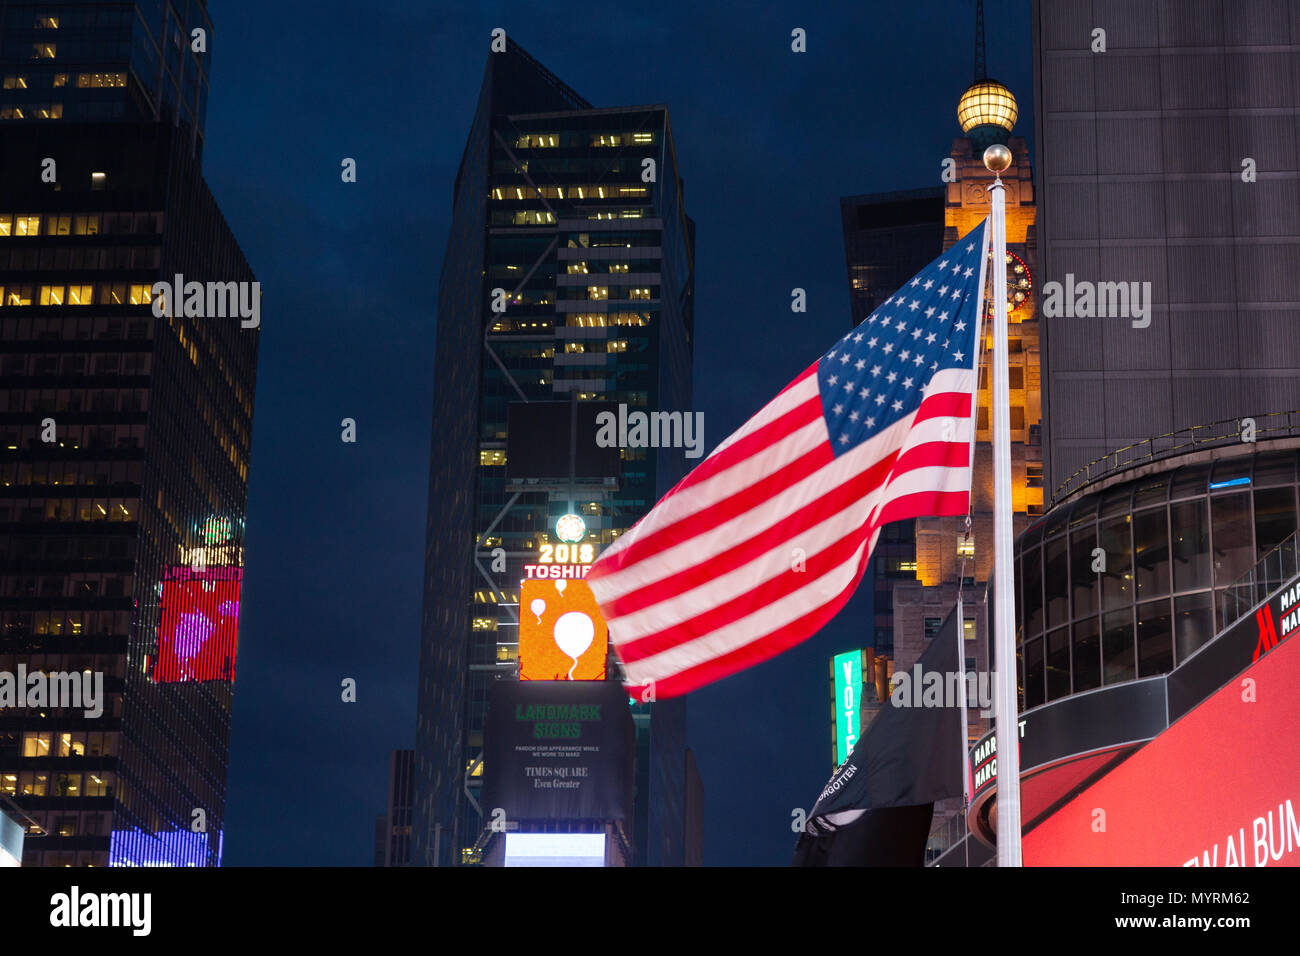 The American flag flying in Times Square at night, Times Square, New York city, United States of America; Concept - Capitalism Stock Photo